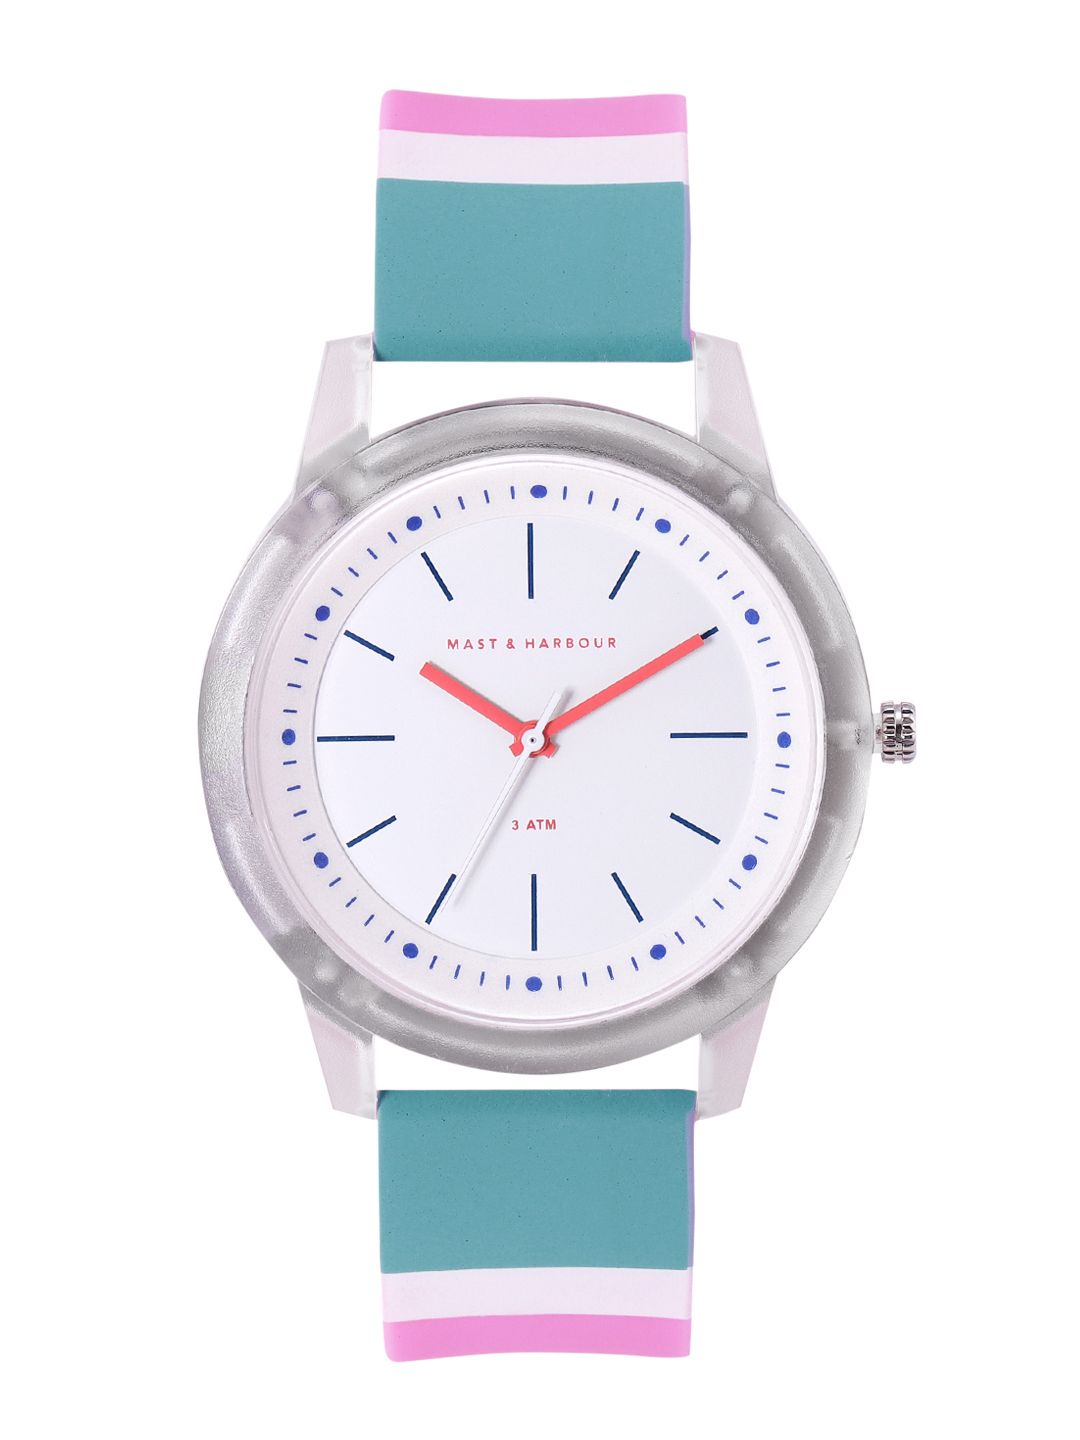 Mast & Harbour Women White Analogue Watch MFB-PN-SM-04 Price in India